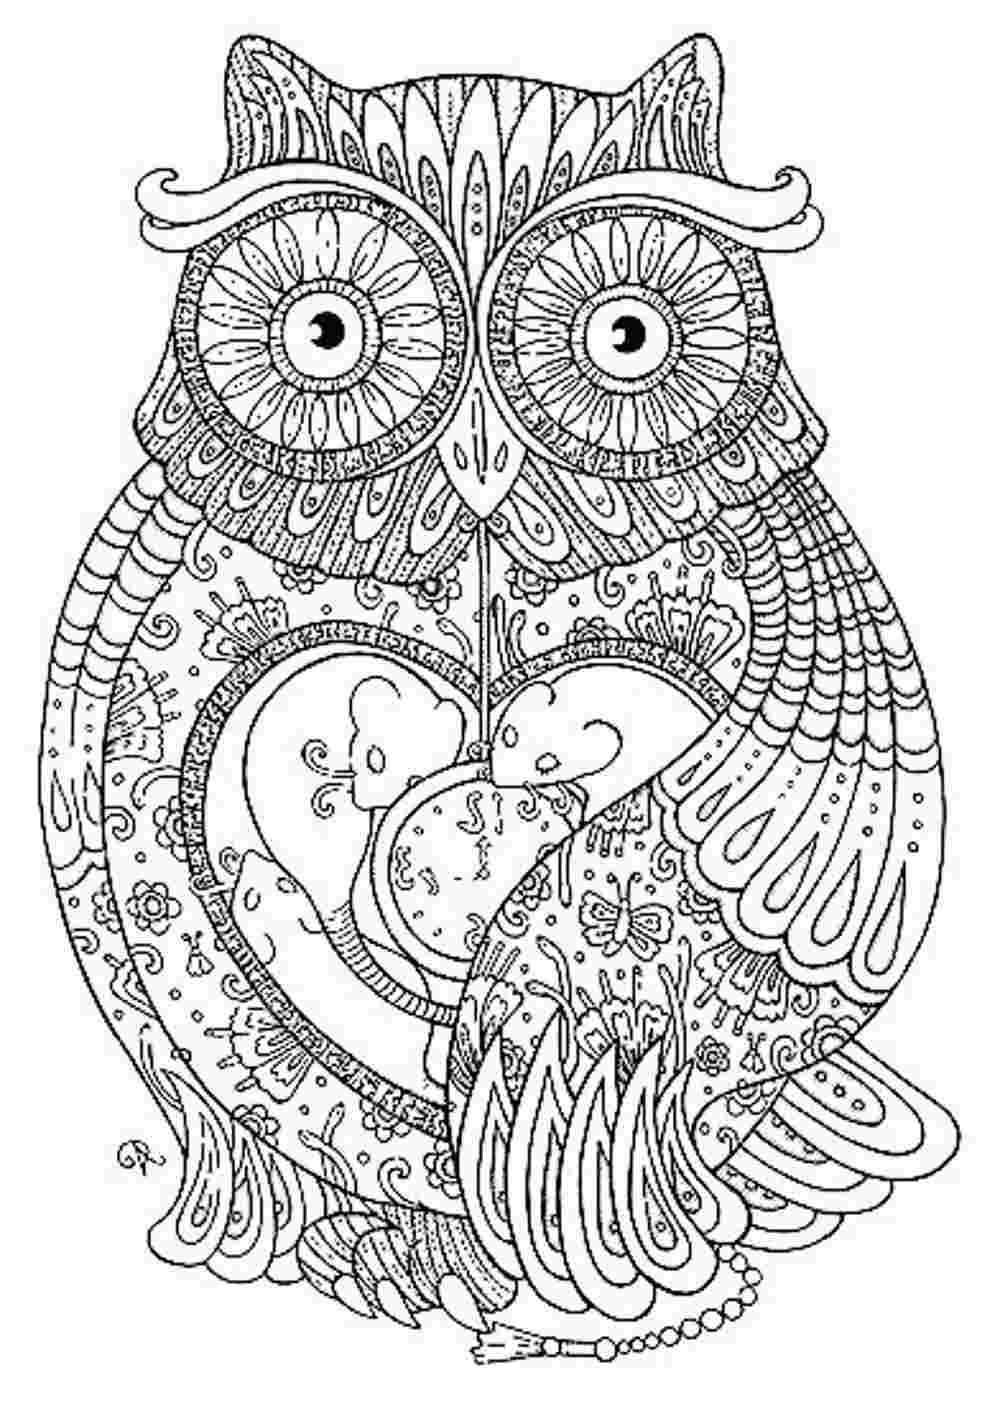 Amazing of Abstract Coloring Pages In Coloring Pages For #224